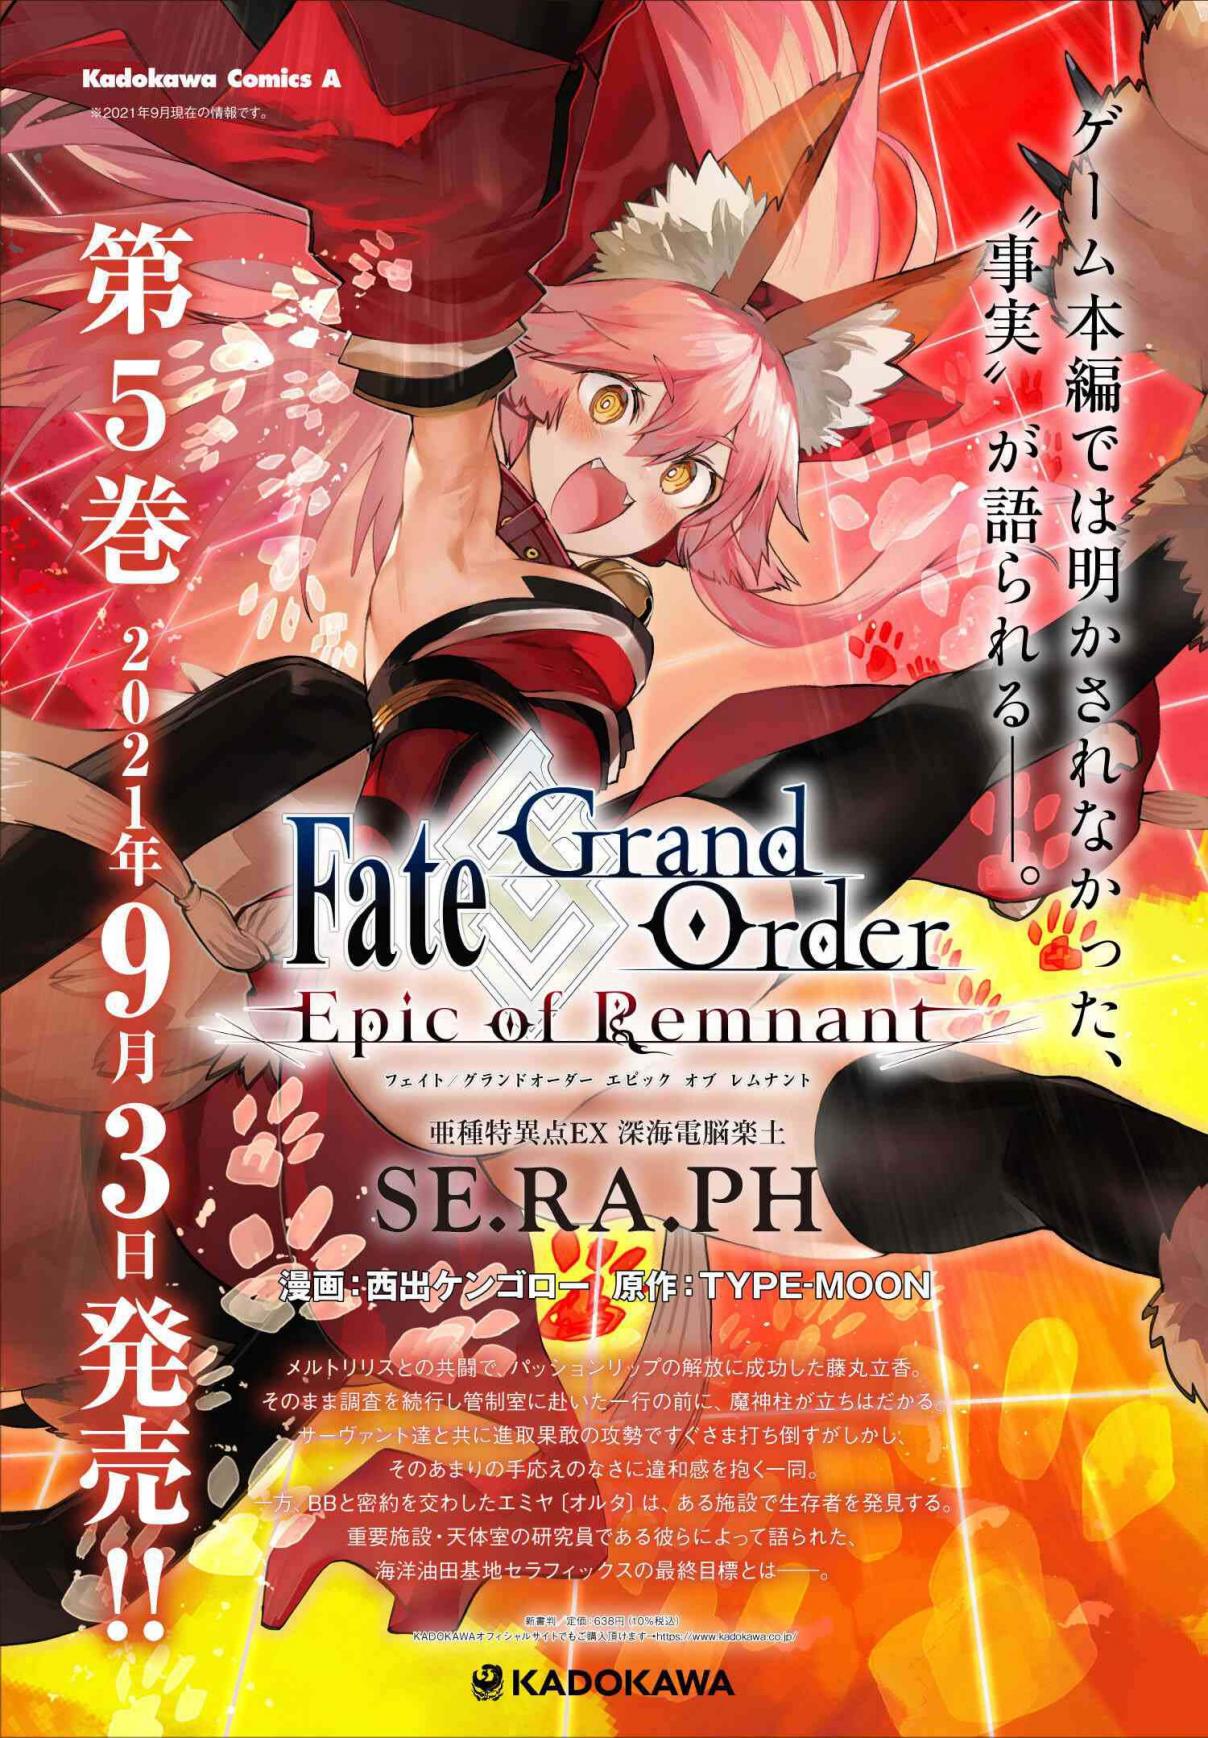 Fate/Grand Order -Epic of Remnant- Deep Sea Cyber-Paradise, SE.RA.PH 27.1